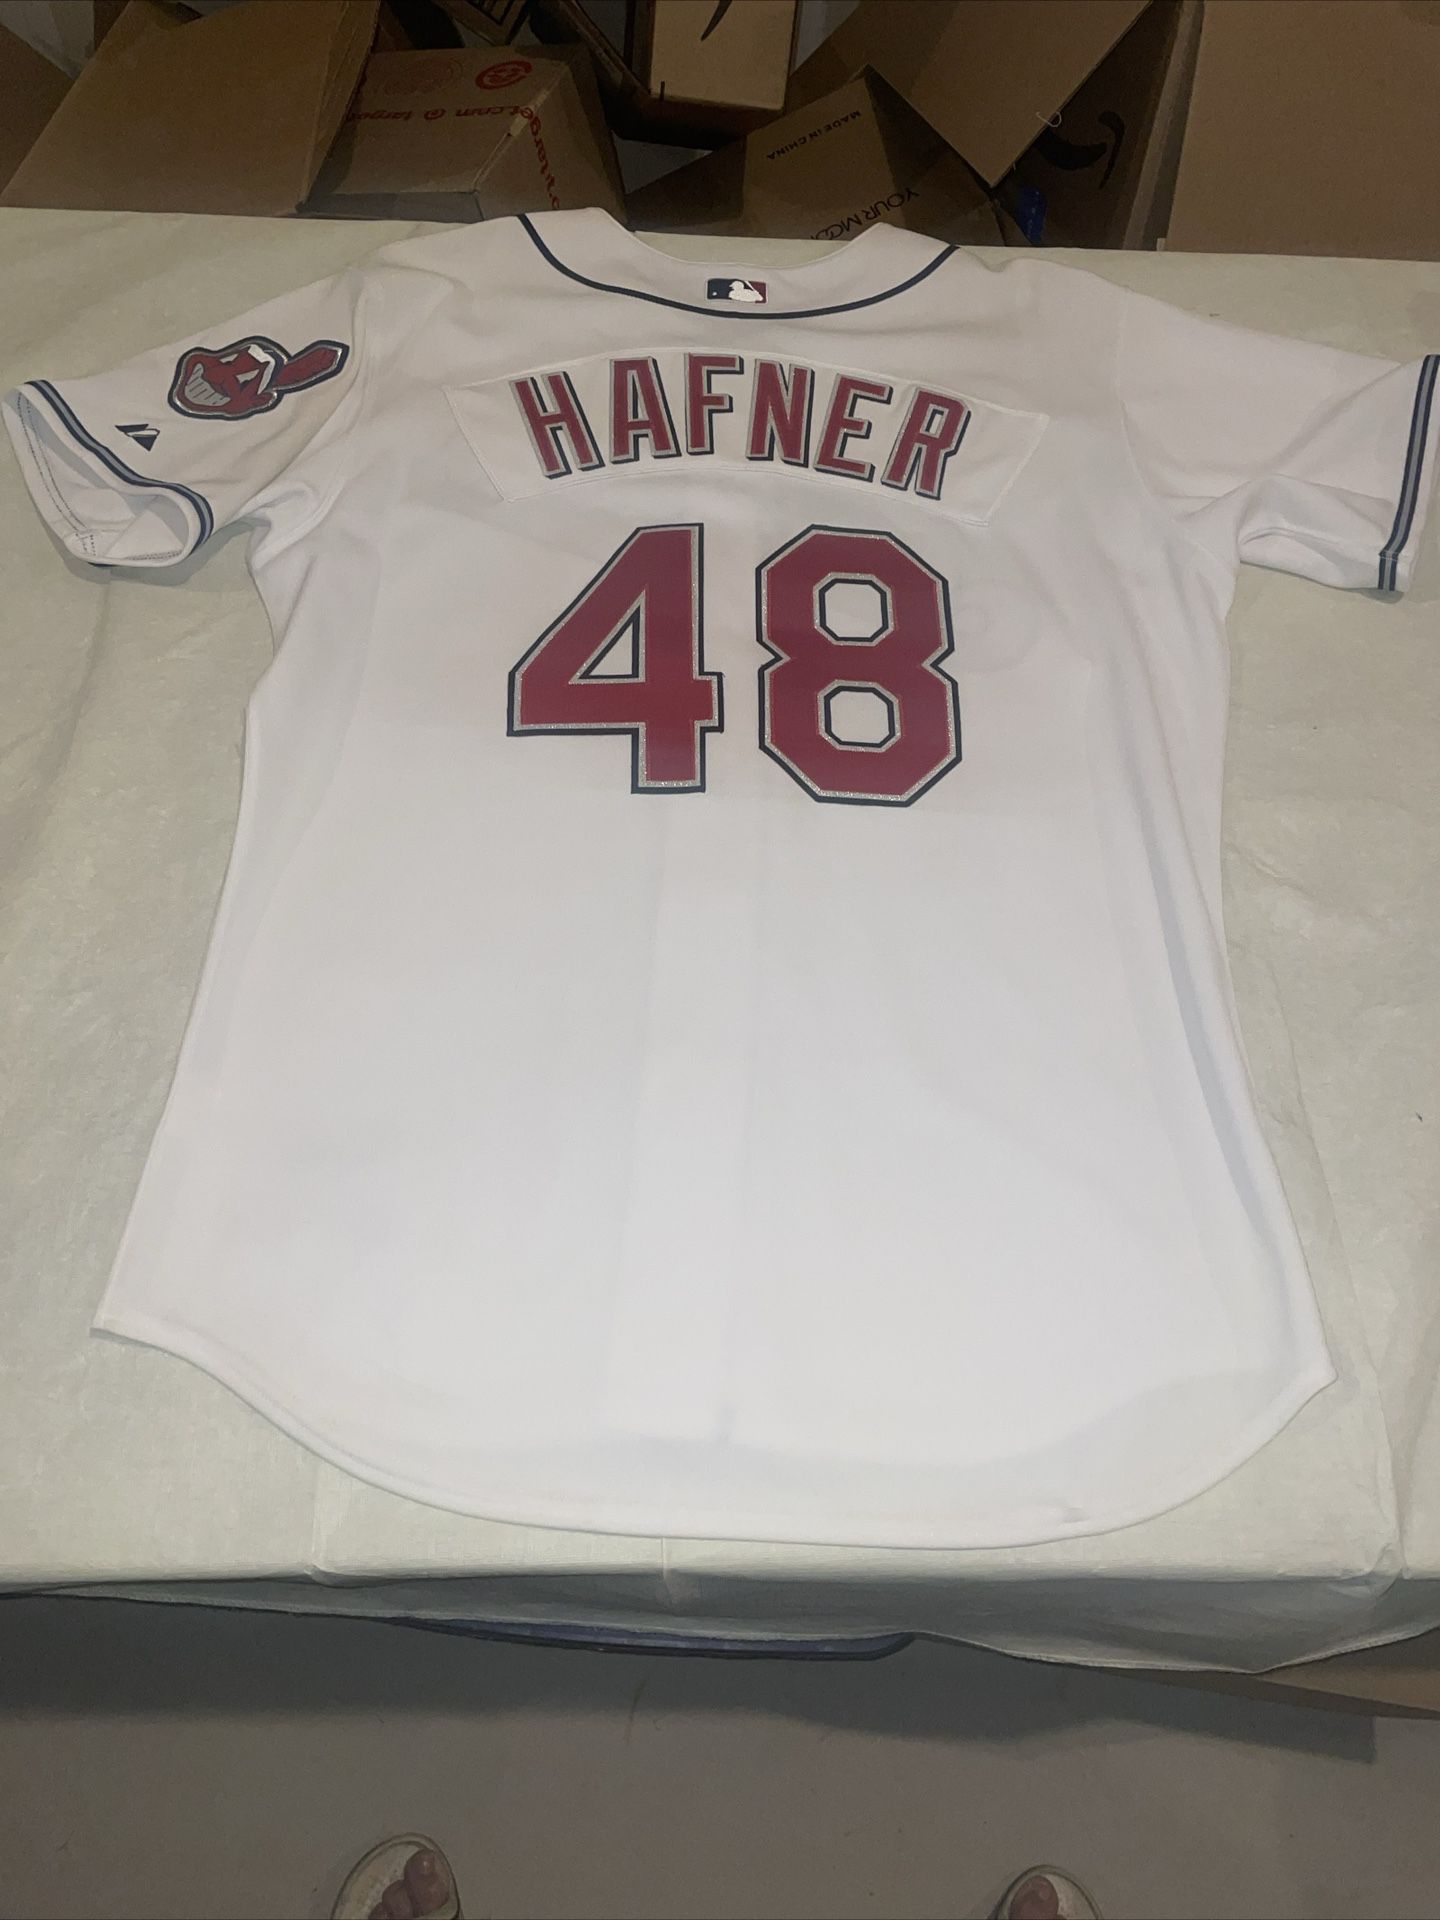 Authentic Cleveland Indians Travis Hafner Jersey Mens 48 Majestic USA 6200 Sewn